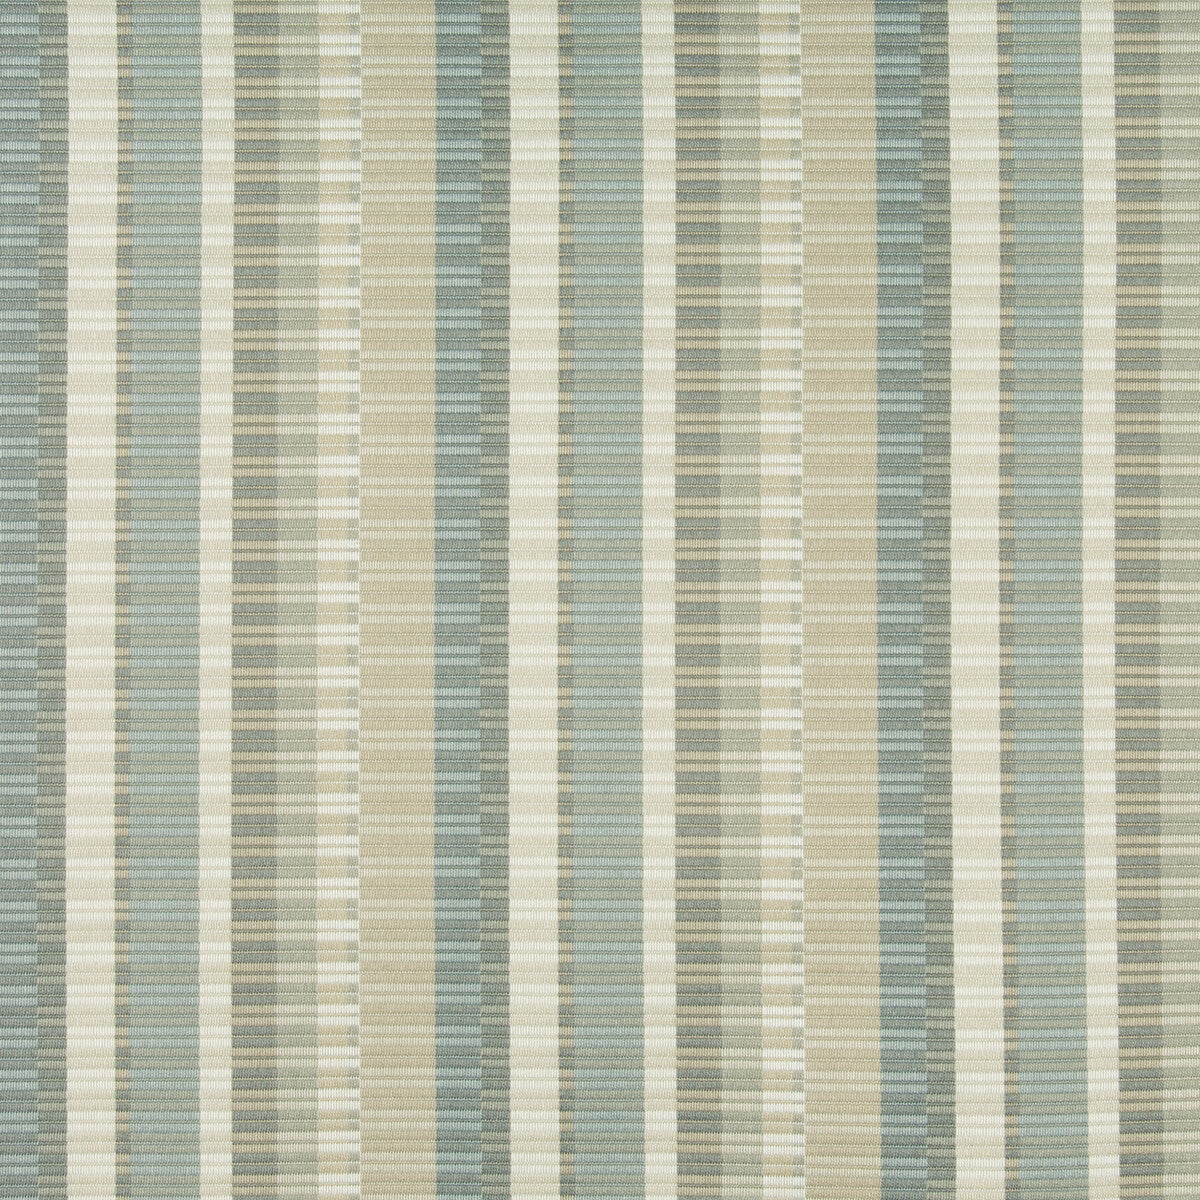 Kravet Design fabric in 35042-1516 color - pattern 35042.1516.0 - by Kravet Design in the Performance Crypton Home collection